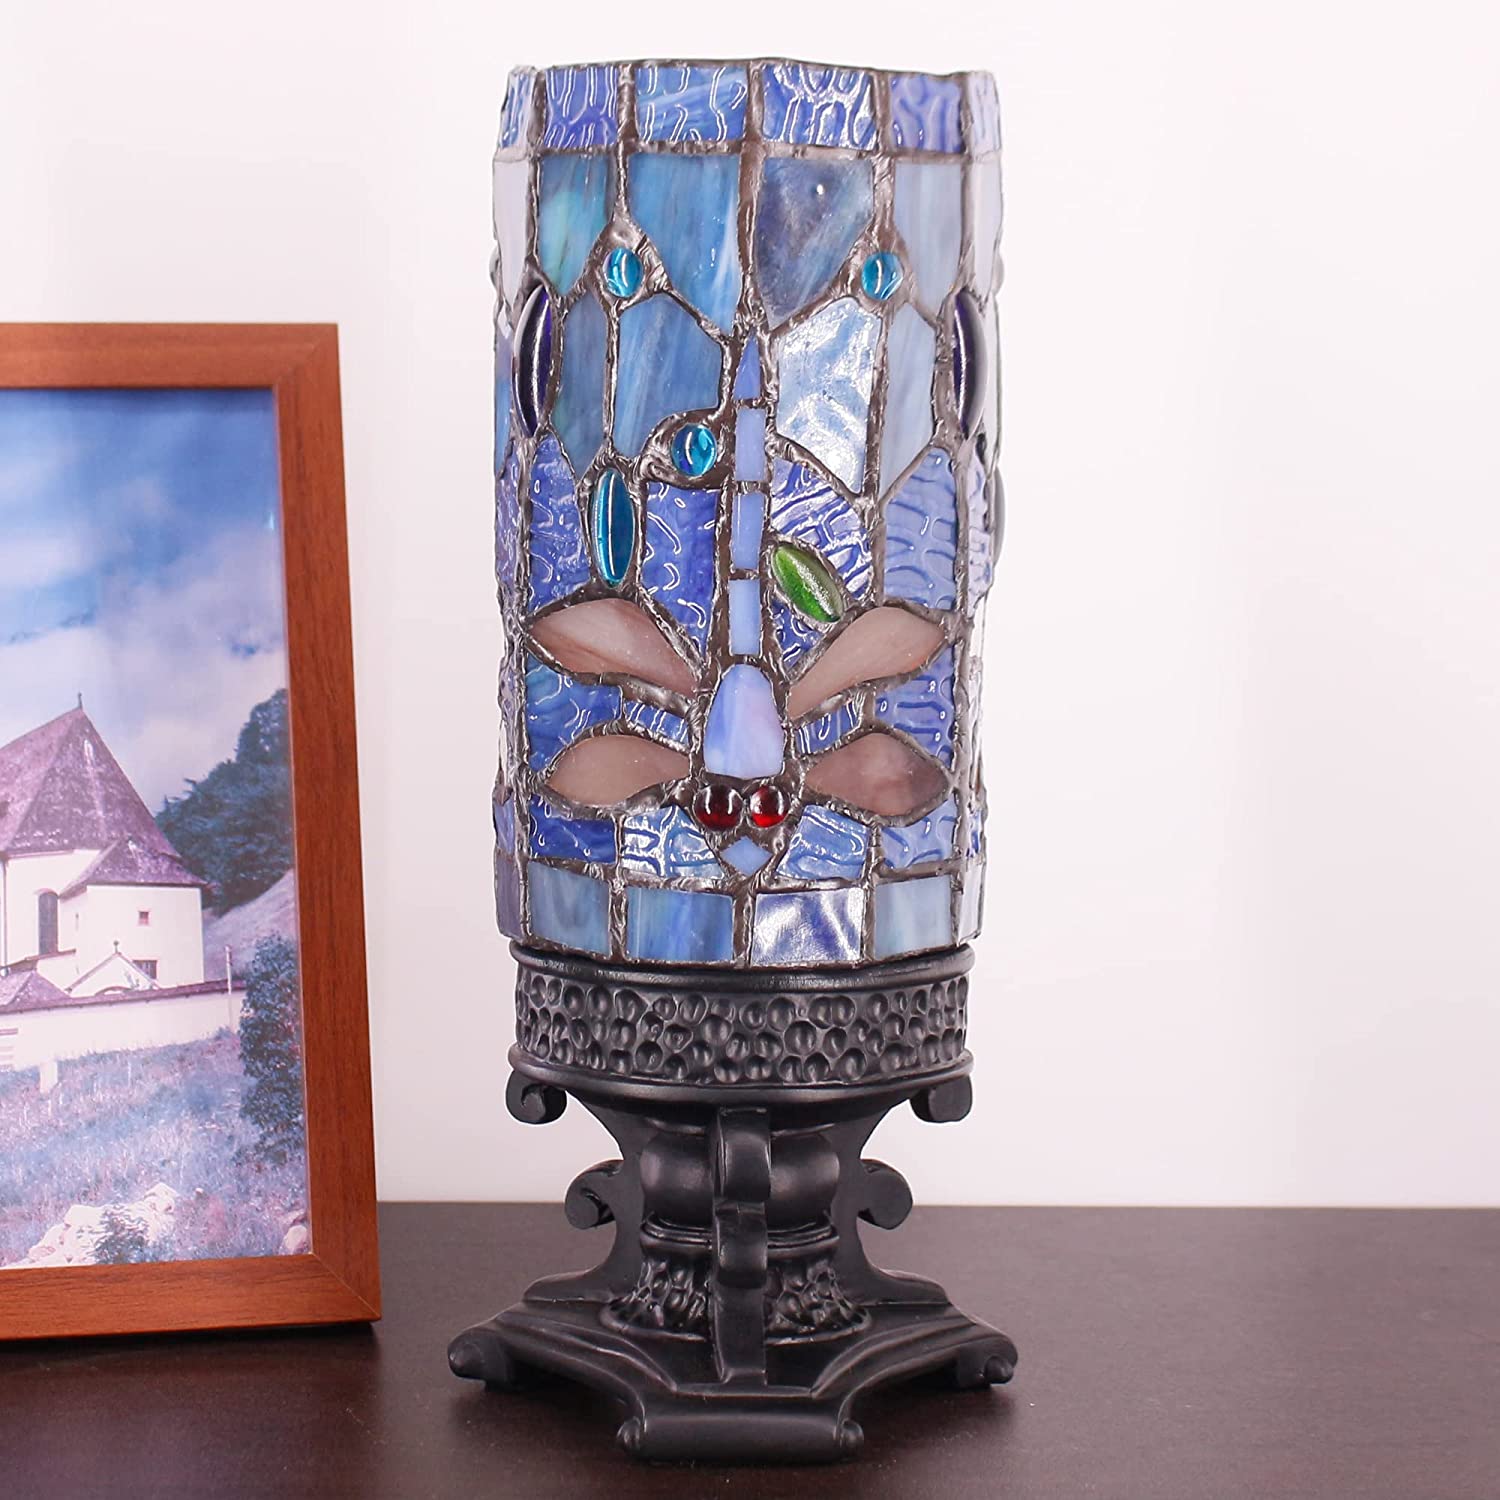 WERFACTORY Small Tiffany Table Lamp Mini Stained Glass Lamp Wide 4 Tall 10 Inch Navy Dragonfly Style Desk Night Light